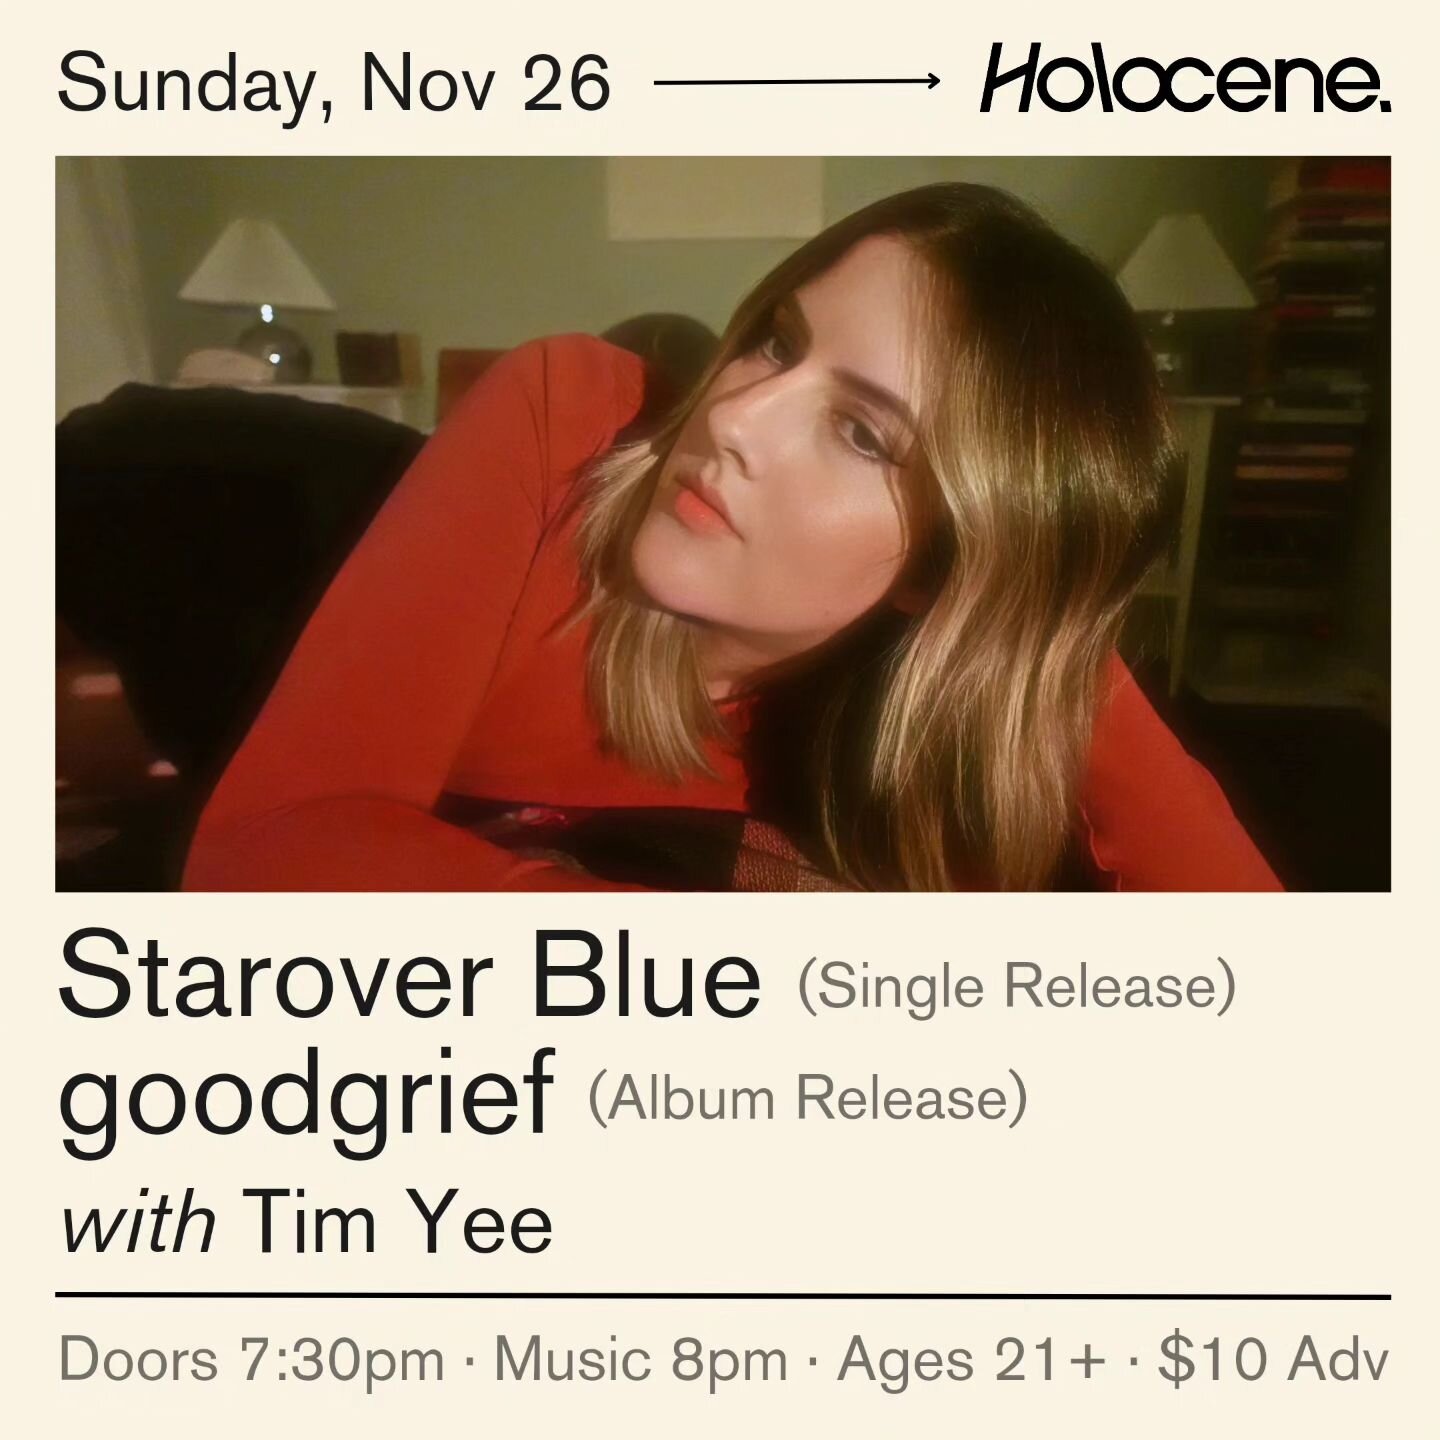 JUST ANNOUNCED: our final show of the year is sunday, november 26 at @holoceneportland.

we'll be celebrating a new single, joined by our friends @goodgriefpop + the wonderful @tim_yeeyee 🖤

mark your calendar and come party with us!
.
.
.
.
.
#port